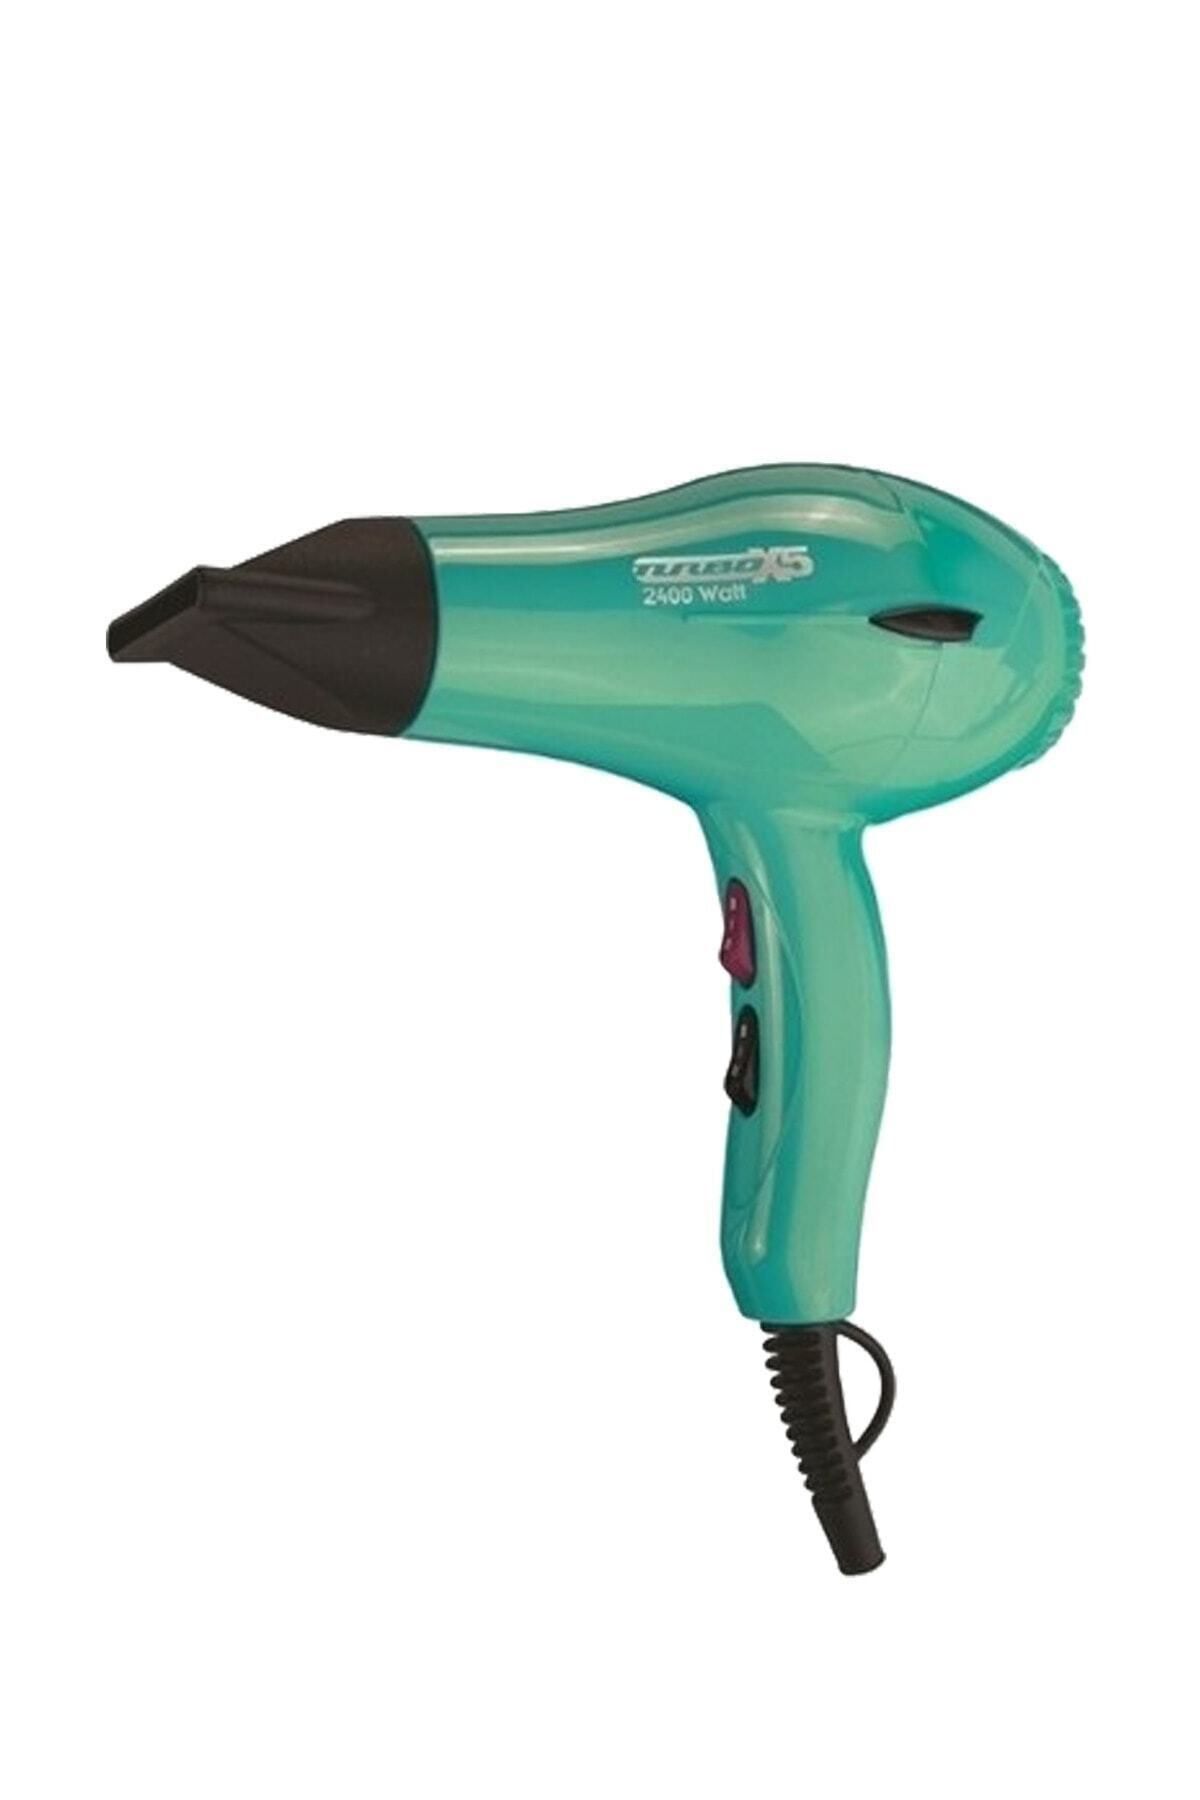 Hector NEW YORK STYLE TURBOX5 2400W BLOW DRYER (TURQUOİSE) KEYON32